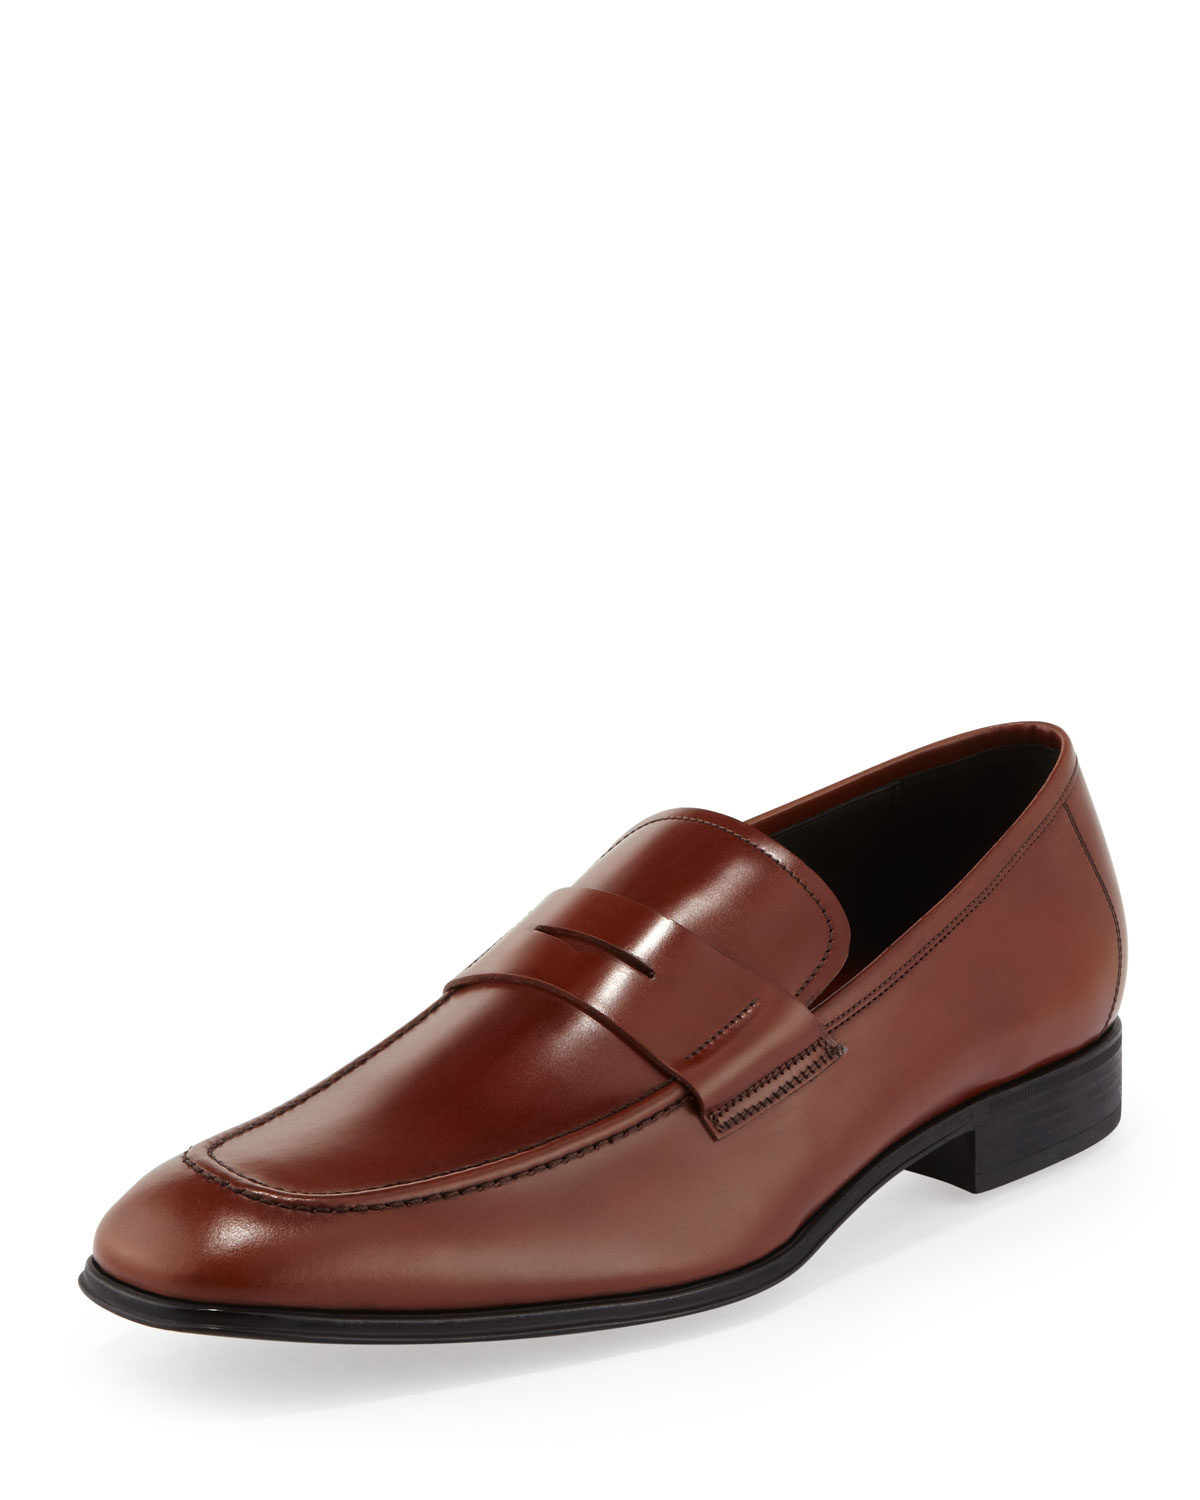 Ferragamo Rocco Leather Penny Loafer in Brown for Men - Lyst